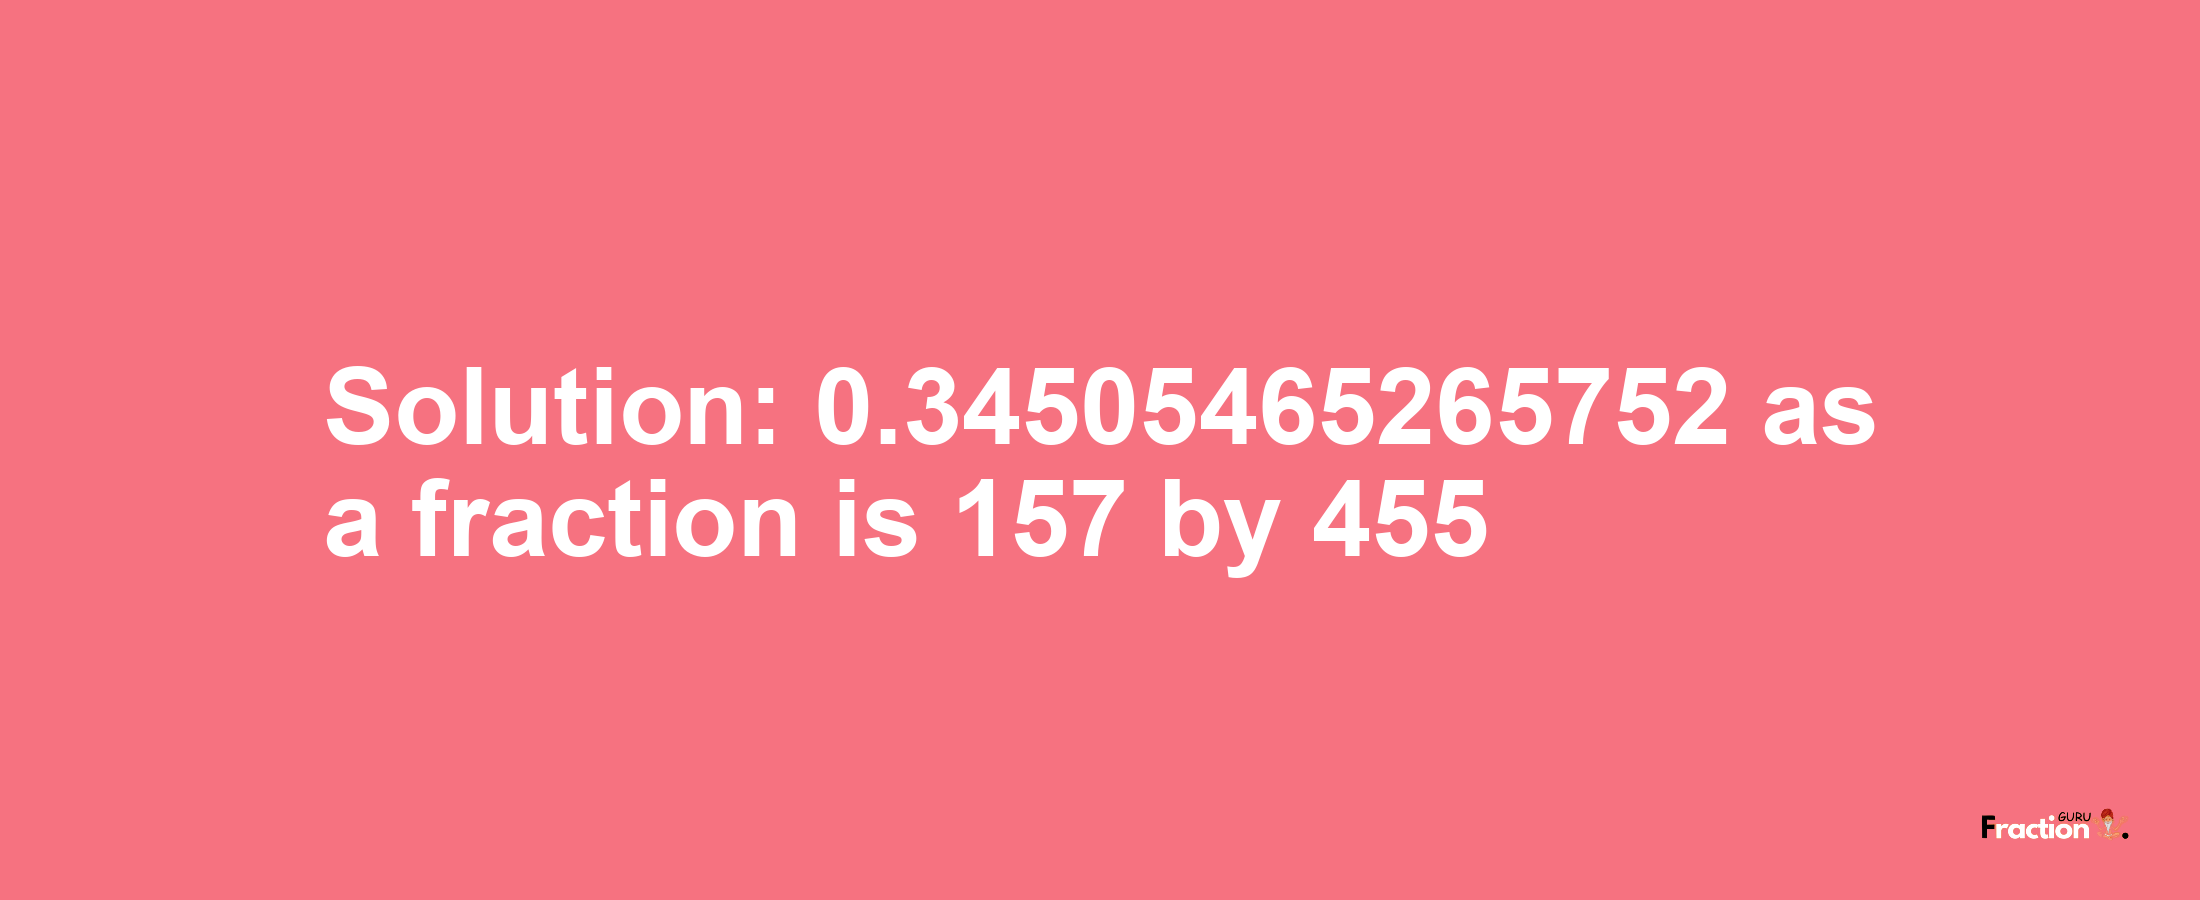 Solution:0.34505465265752 as a fraction is 157/455